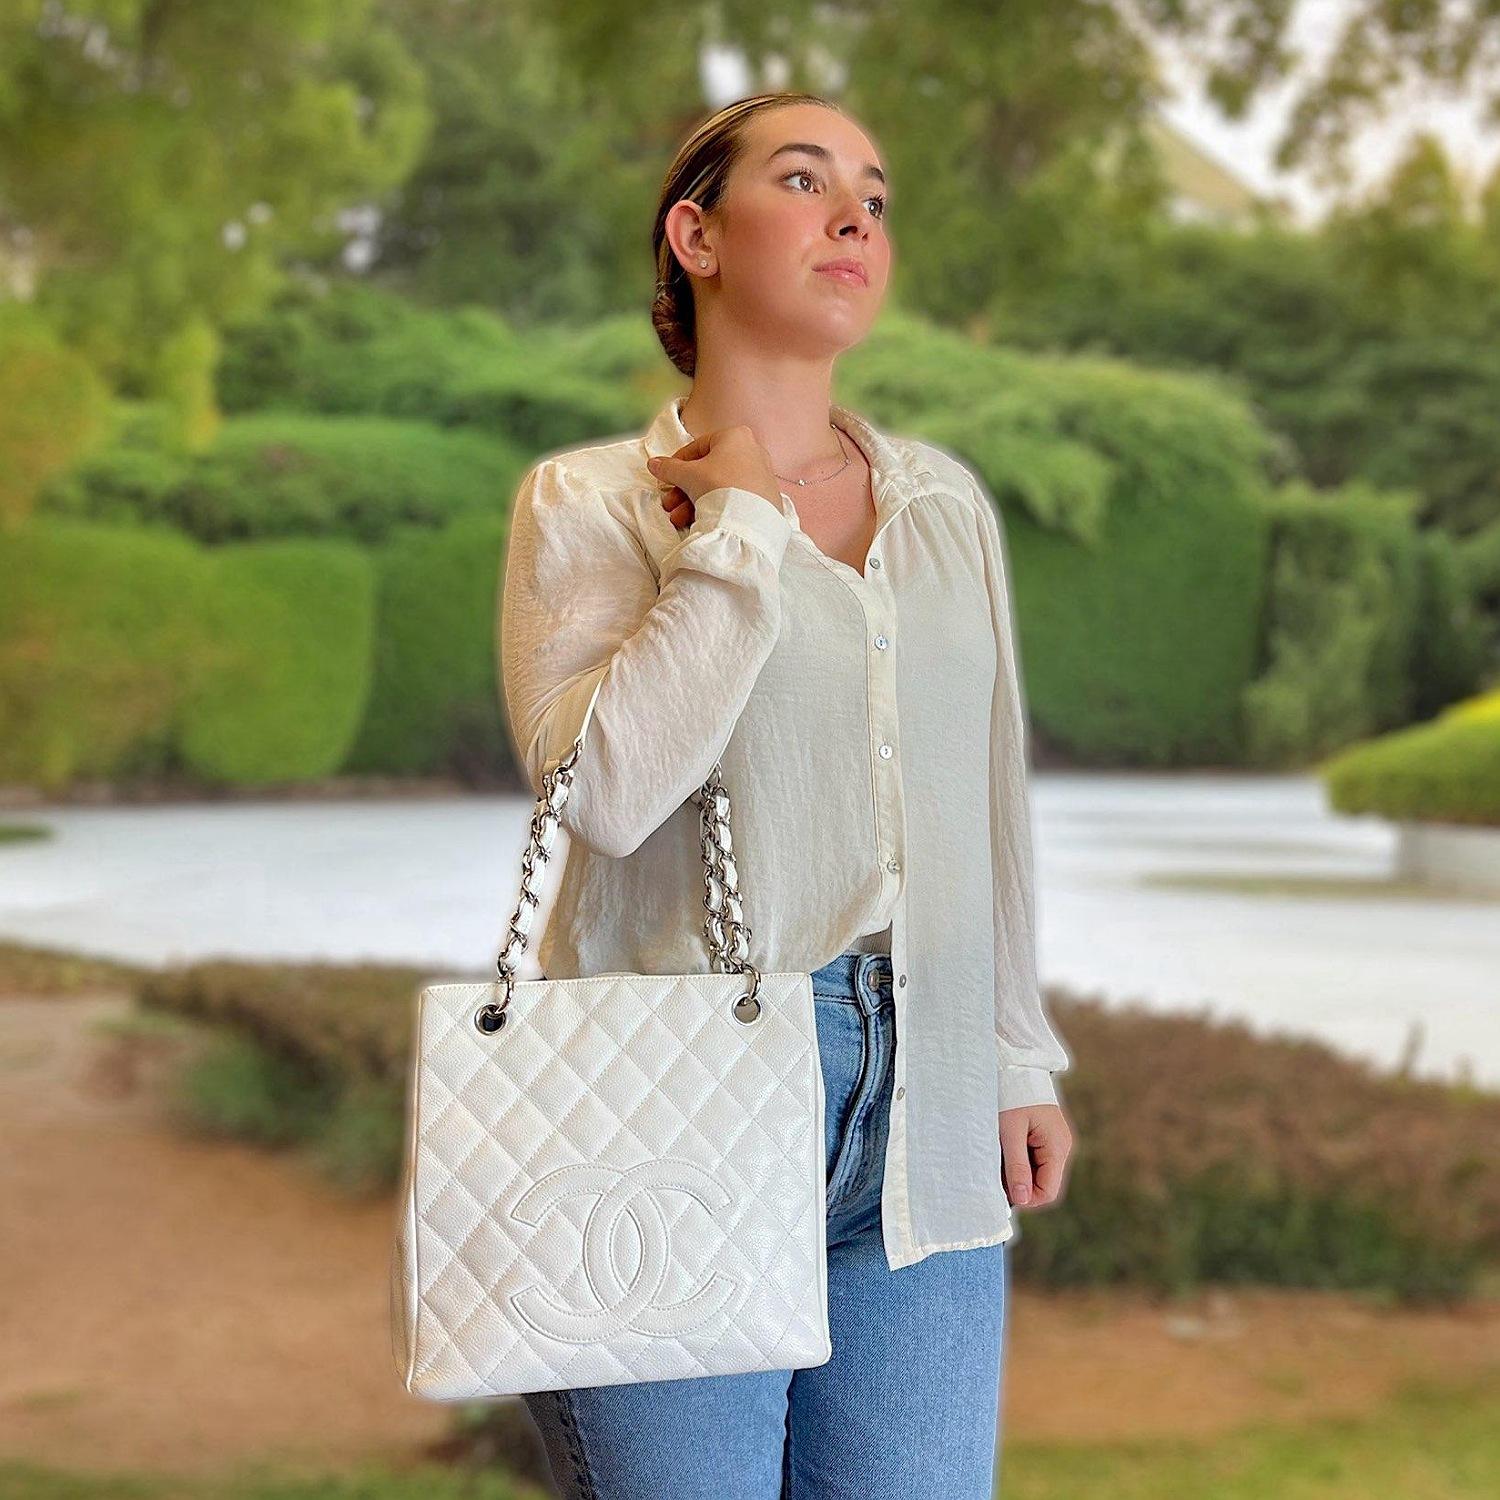 This Chanel Petite Shopping Tote is crafted of white caviar leather and features a variety of pockets for easy and simple organization of your daily necessities. The two handles are made of silver-tone chain with interwoven white leather for a soft